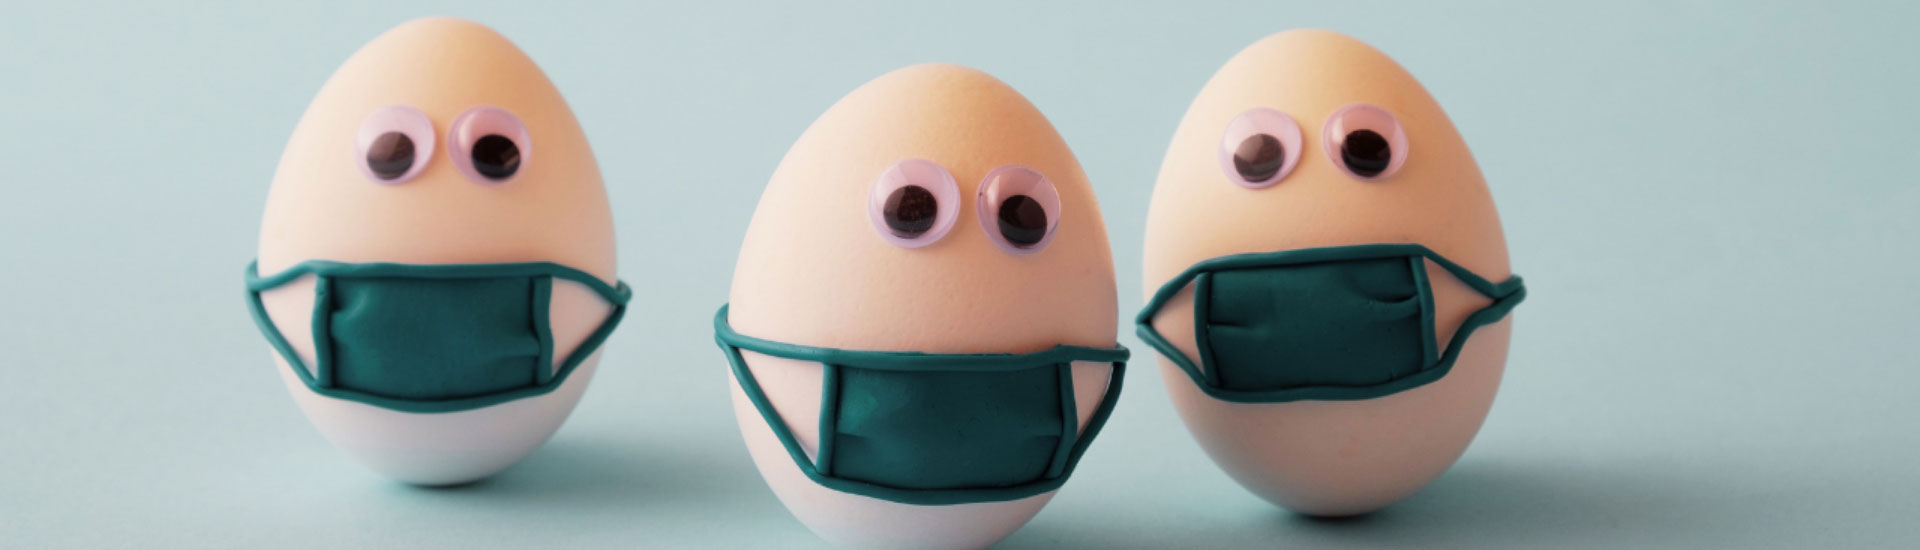 eggs-with-faces-wearing-surgical-masks